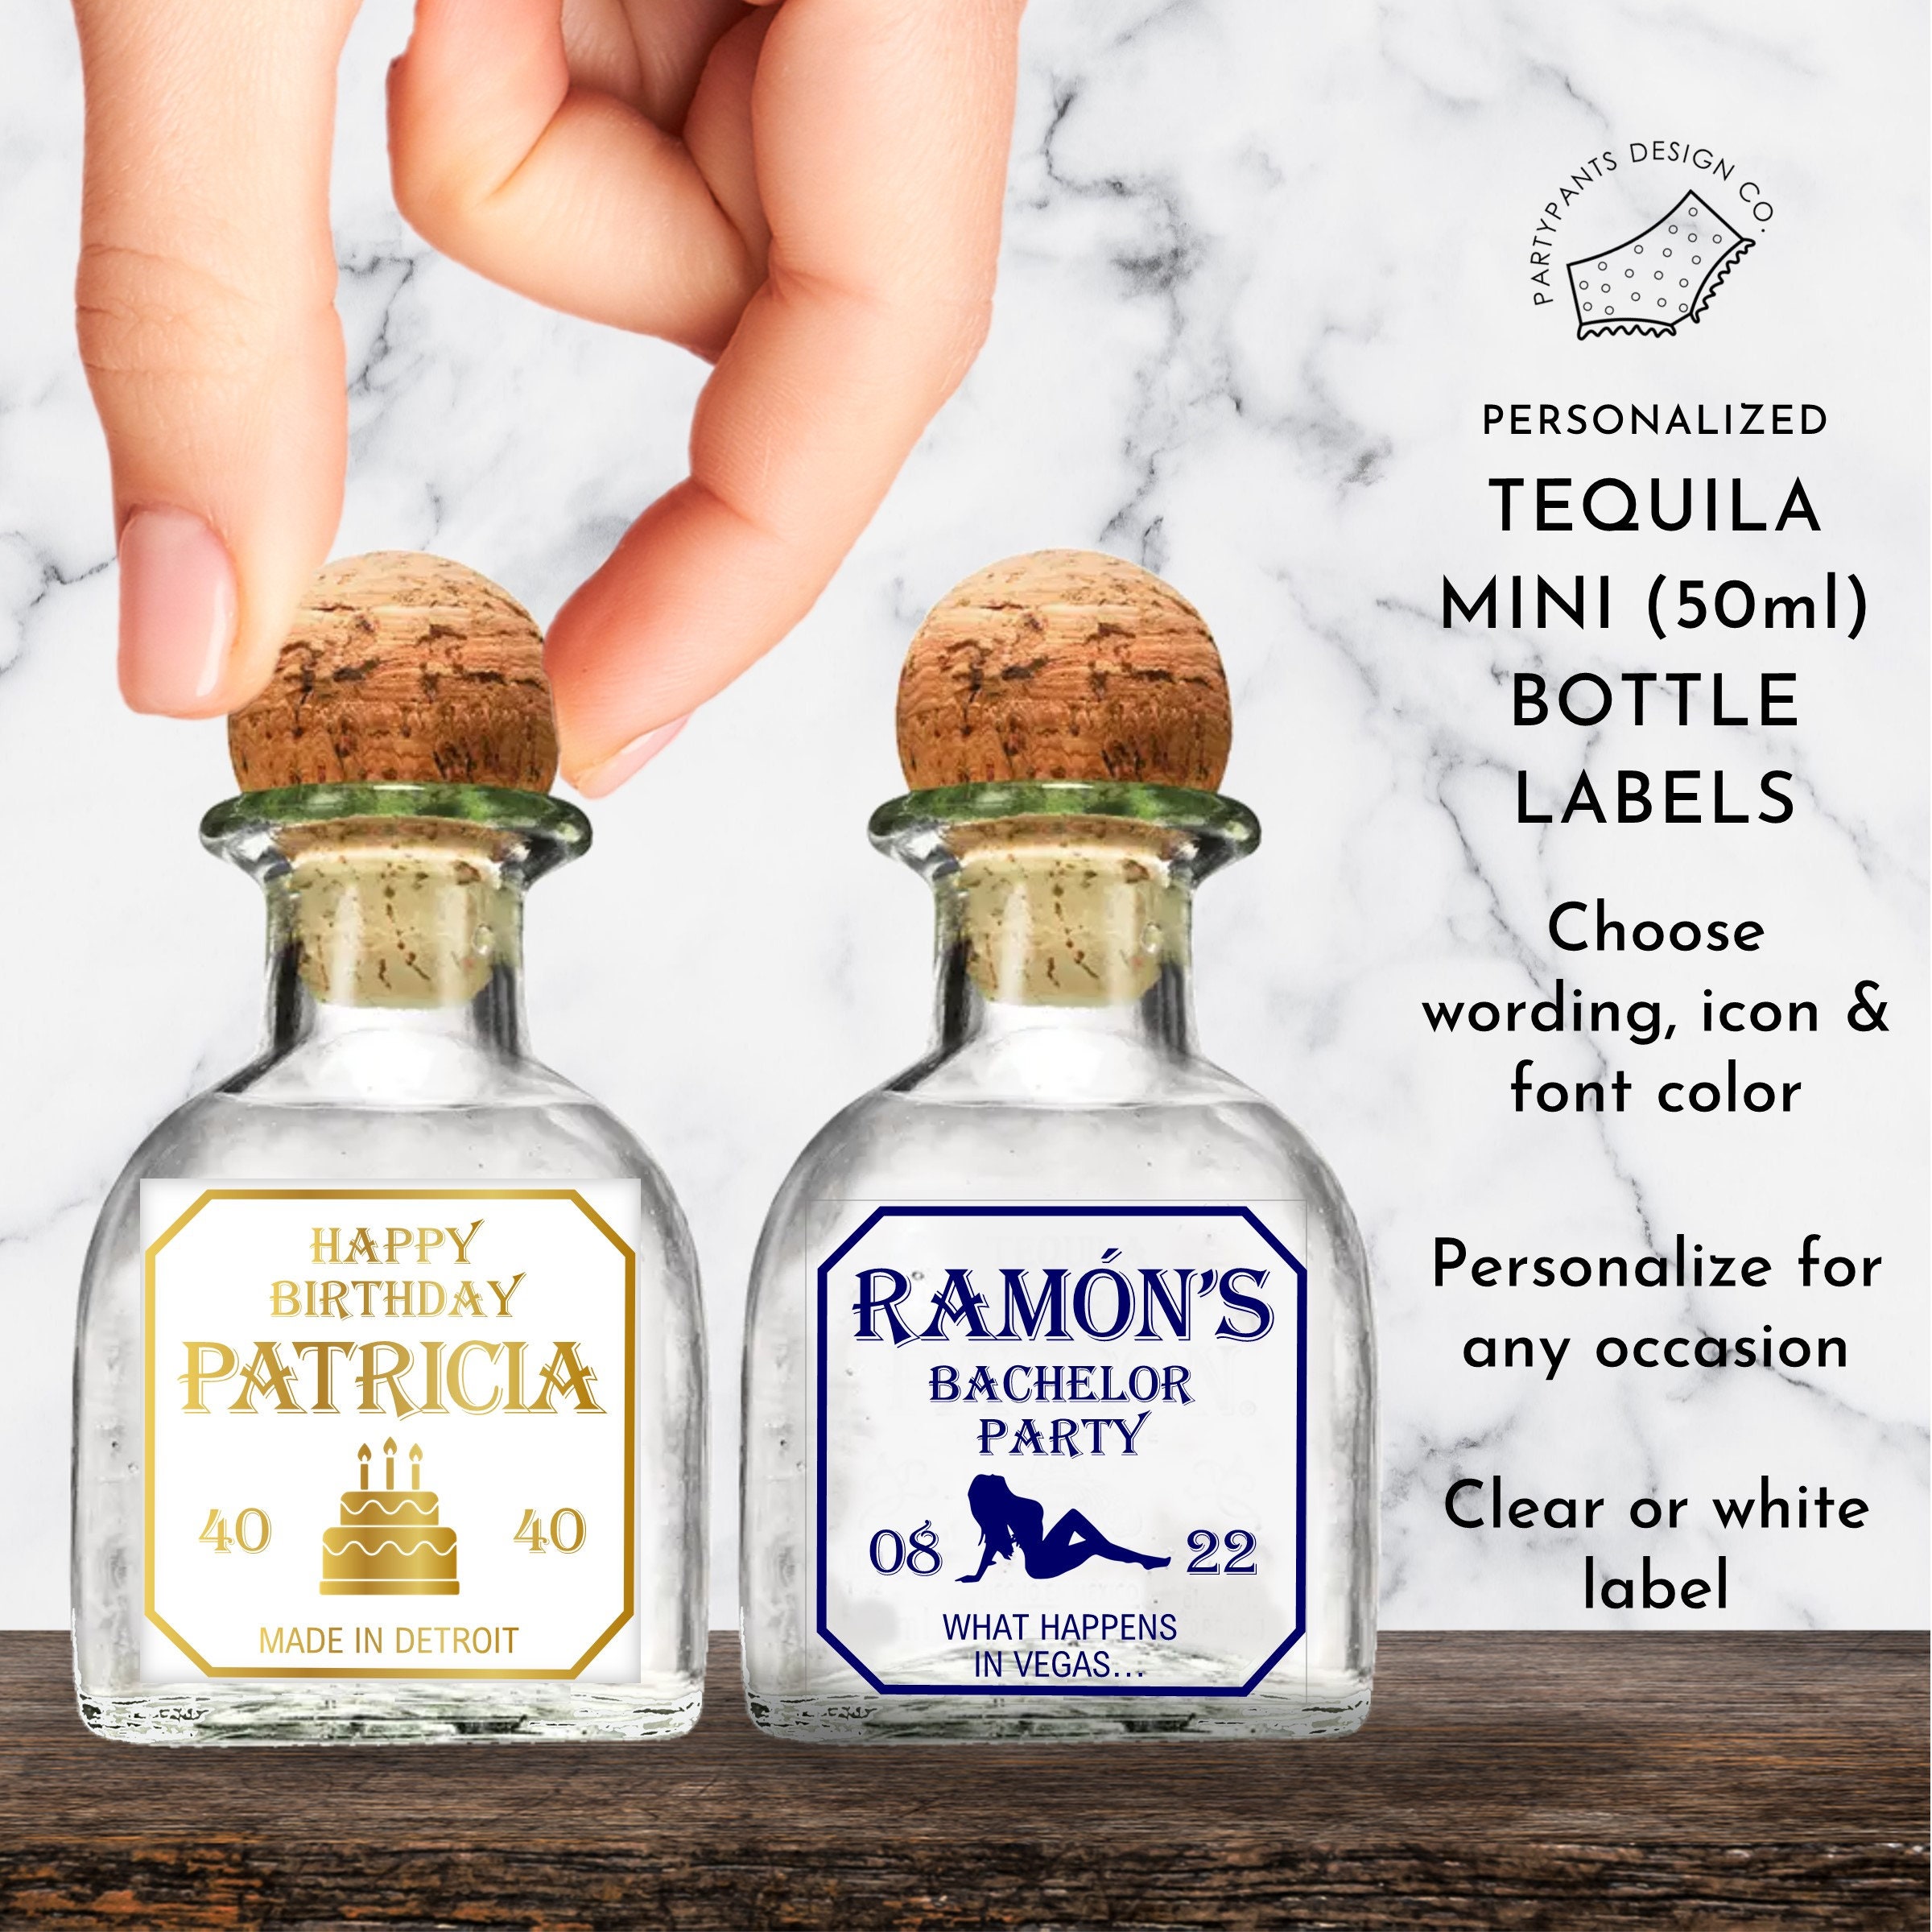 Personalized Tequila Mini 50ml Shot Bottle Labels | White or Clear | Choose  Wording Font Color & Icon